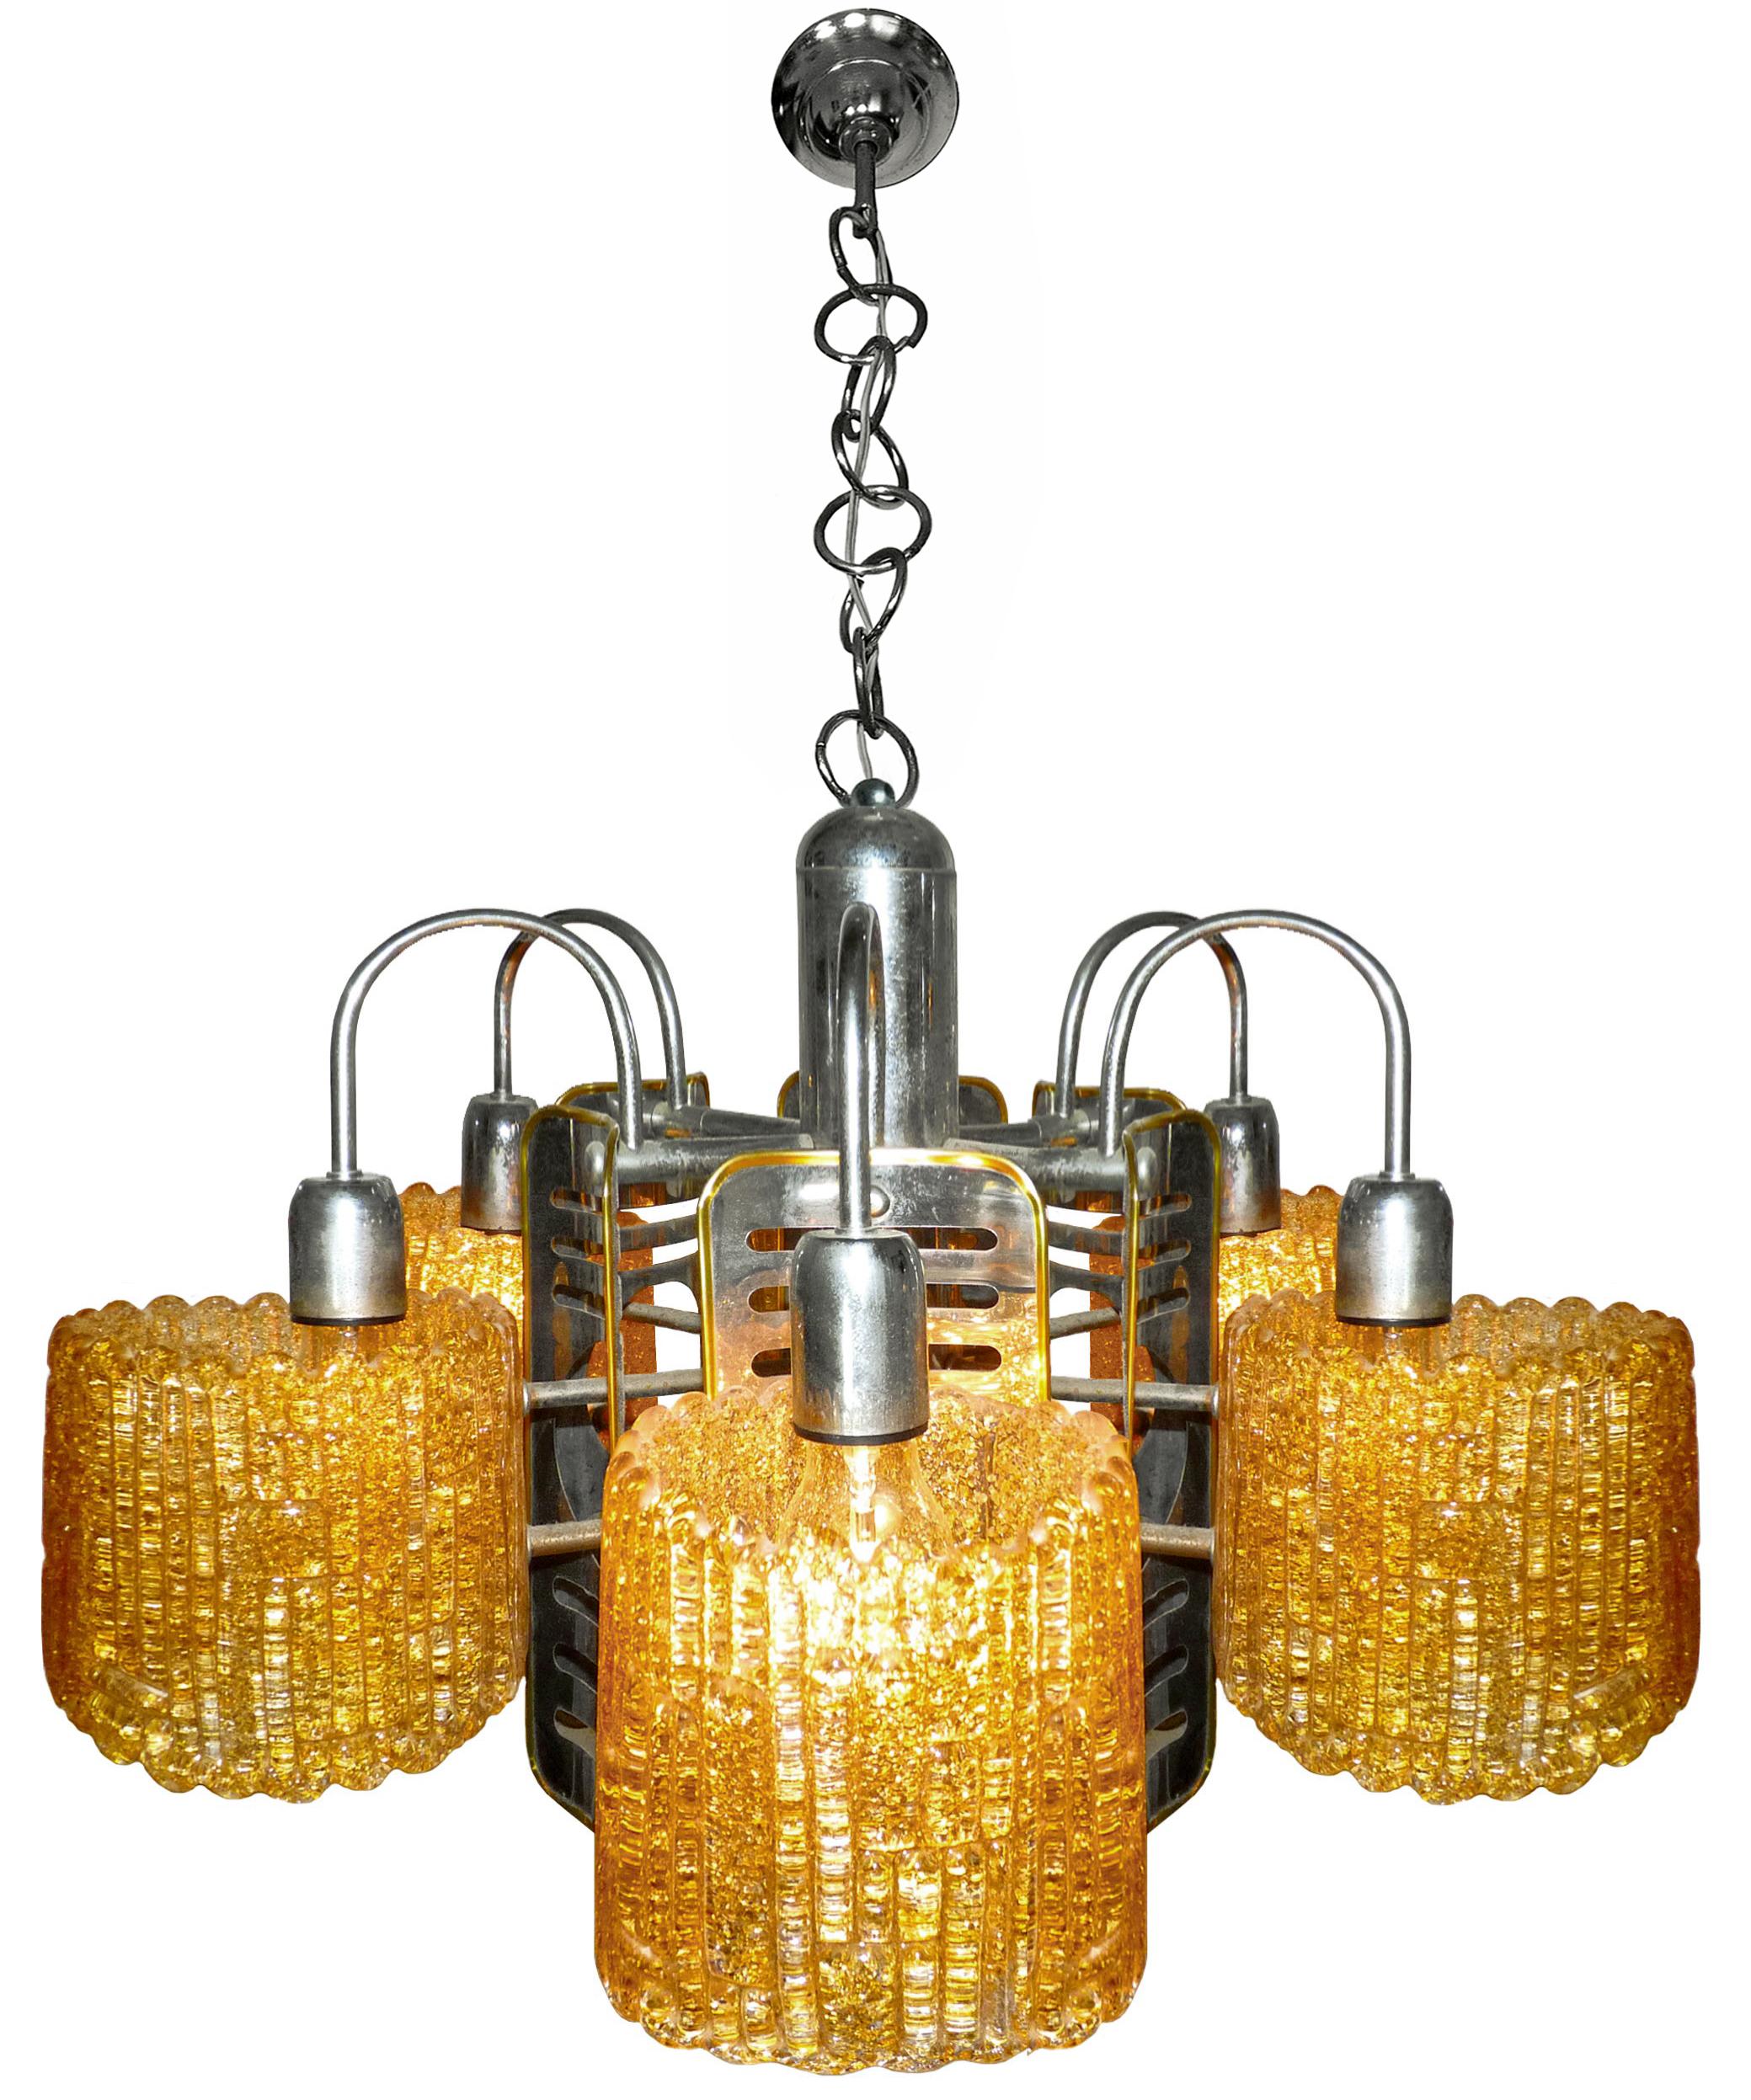 Rare gorgeous Italian chrome midcentury Murano amber art glass chandelier in the style of Barovier & Toso with drum hand blown Graniglia textured glass shades
Measures:
Diameter 28 in /71 cm
Height 40 in (20 in + 20 in/ chain); 100 cm (50 cm + 50